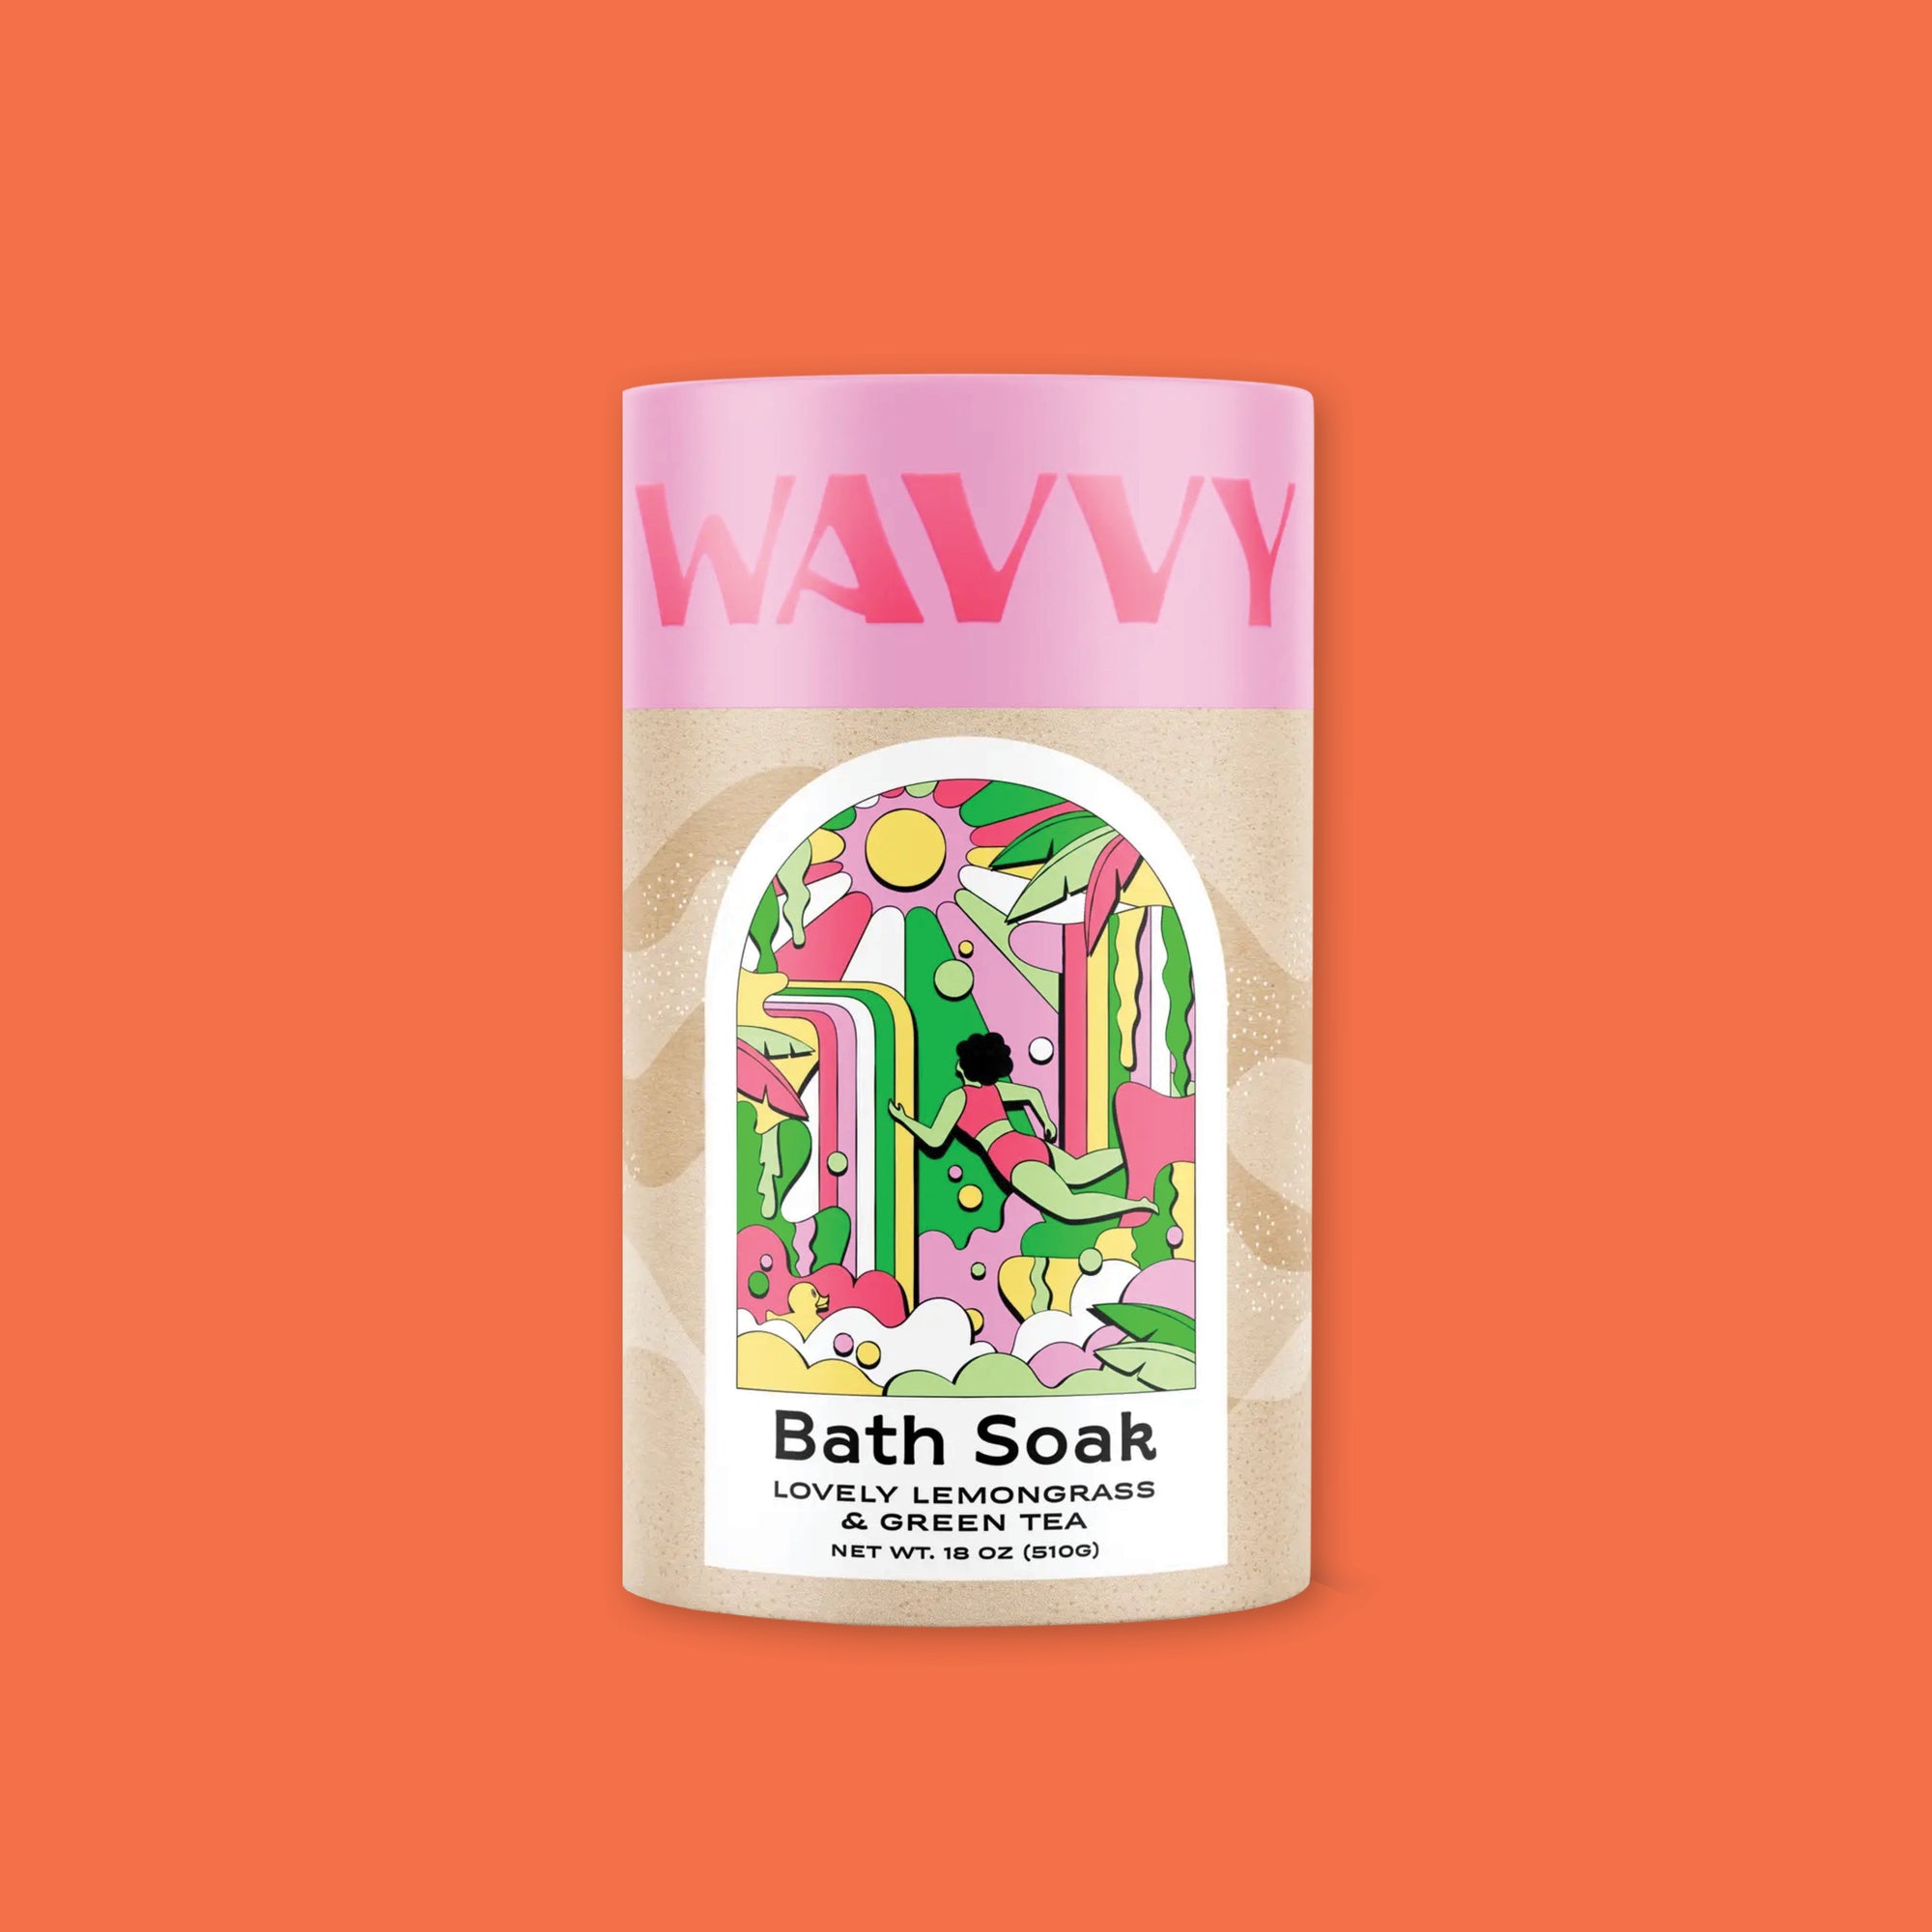 On an orangey-red background sits a container. This ccontainer has a pink lid that says "WAVVY" in hot pink, all caps font. The bottom part is a kraft color with a colorful label has an illustration of a sun, waterfall, banana tree leaves, bubbles, a woman swimming, and a rubber duckie in colors of pink, kelly green, yellow, hot pink, and white. It says on the bottom "Bath Soak" in black, block font. It also says "LOVELY LEMONGRASS & GREEN TEA" in black, all caps block font. NET WT. 18 OZ (510G)